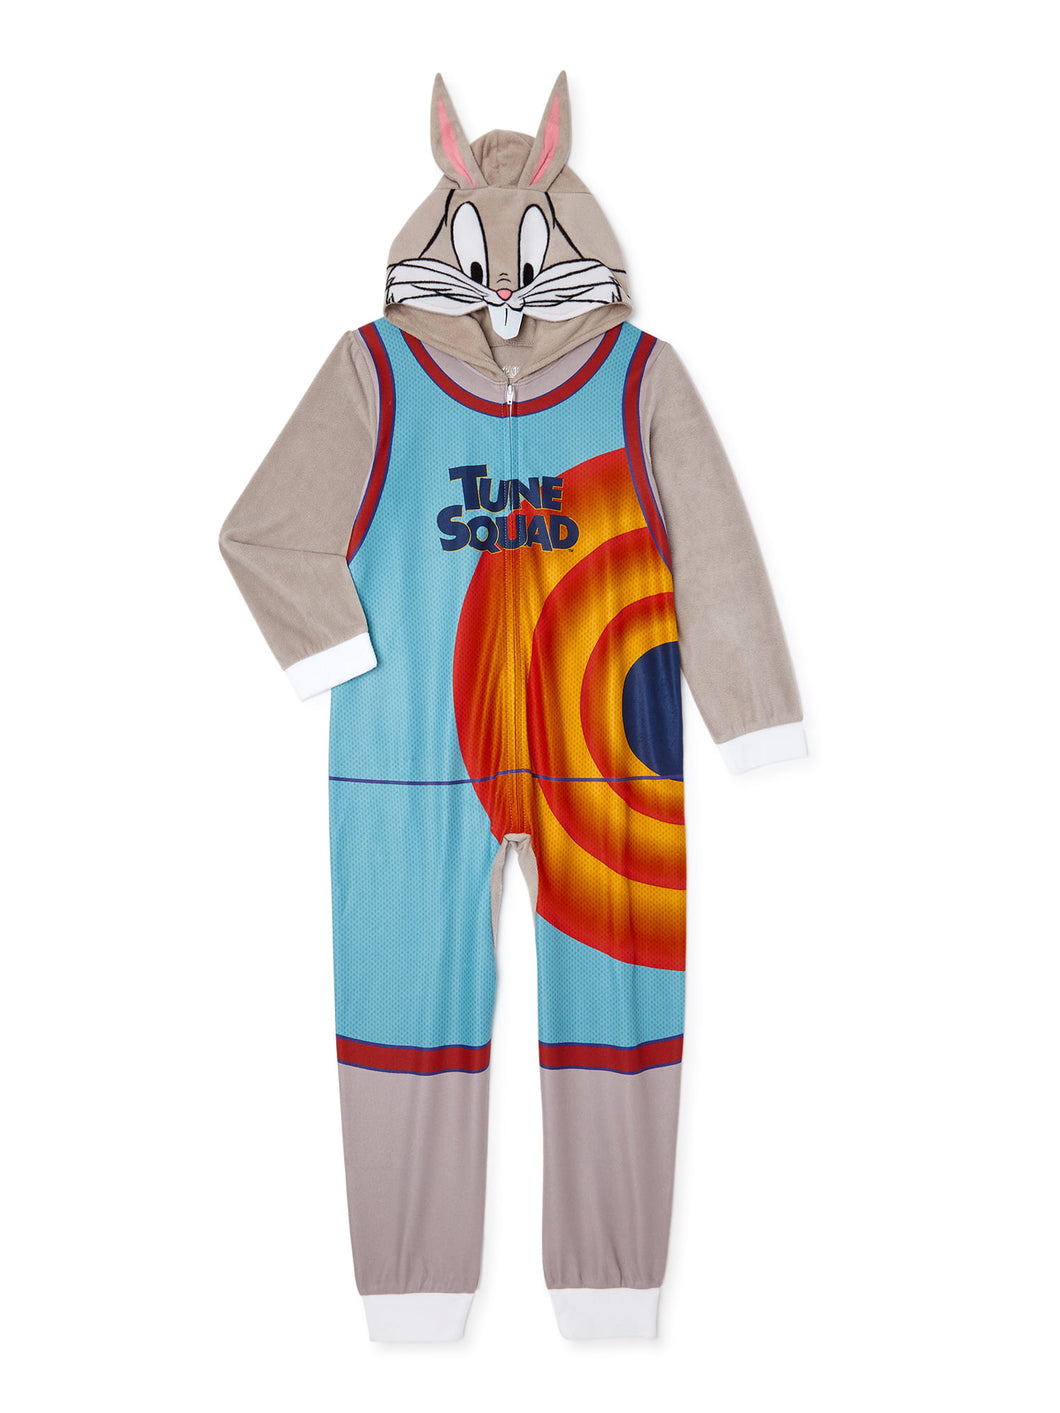 Space Jam Exclusive Boys Hooded Union Suit Pajama, Sizes 4-12